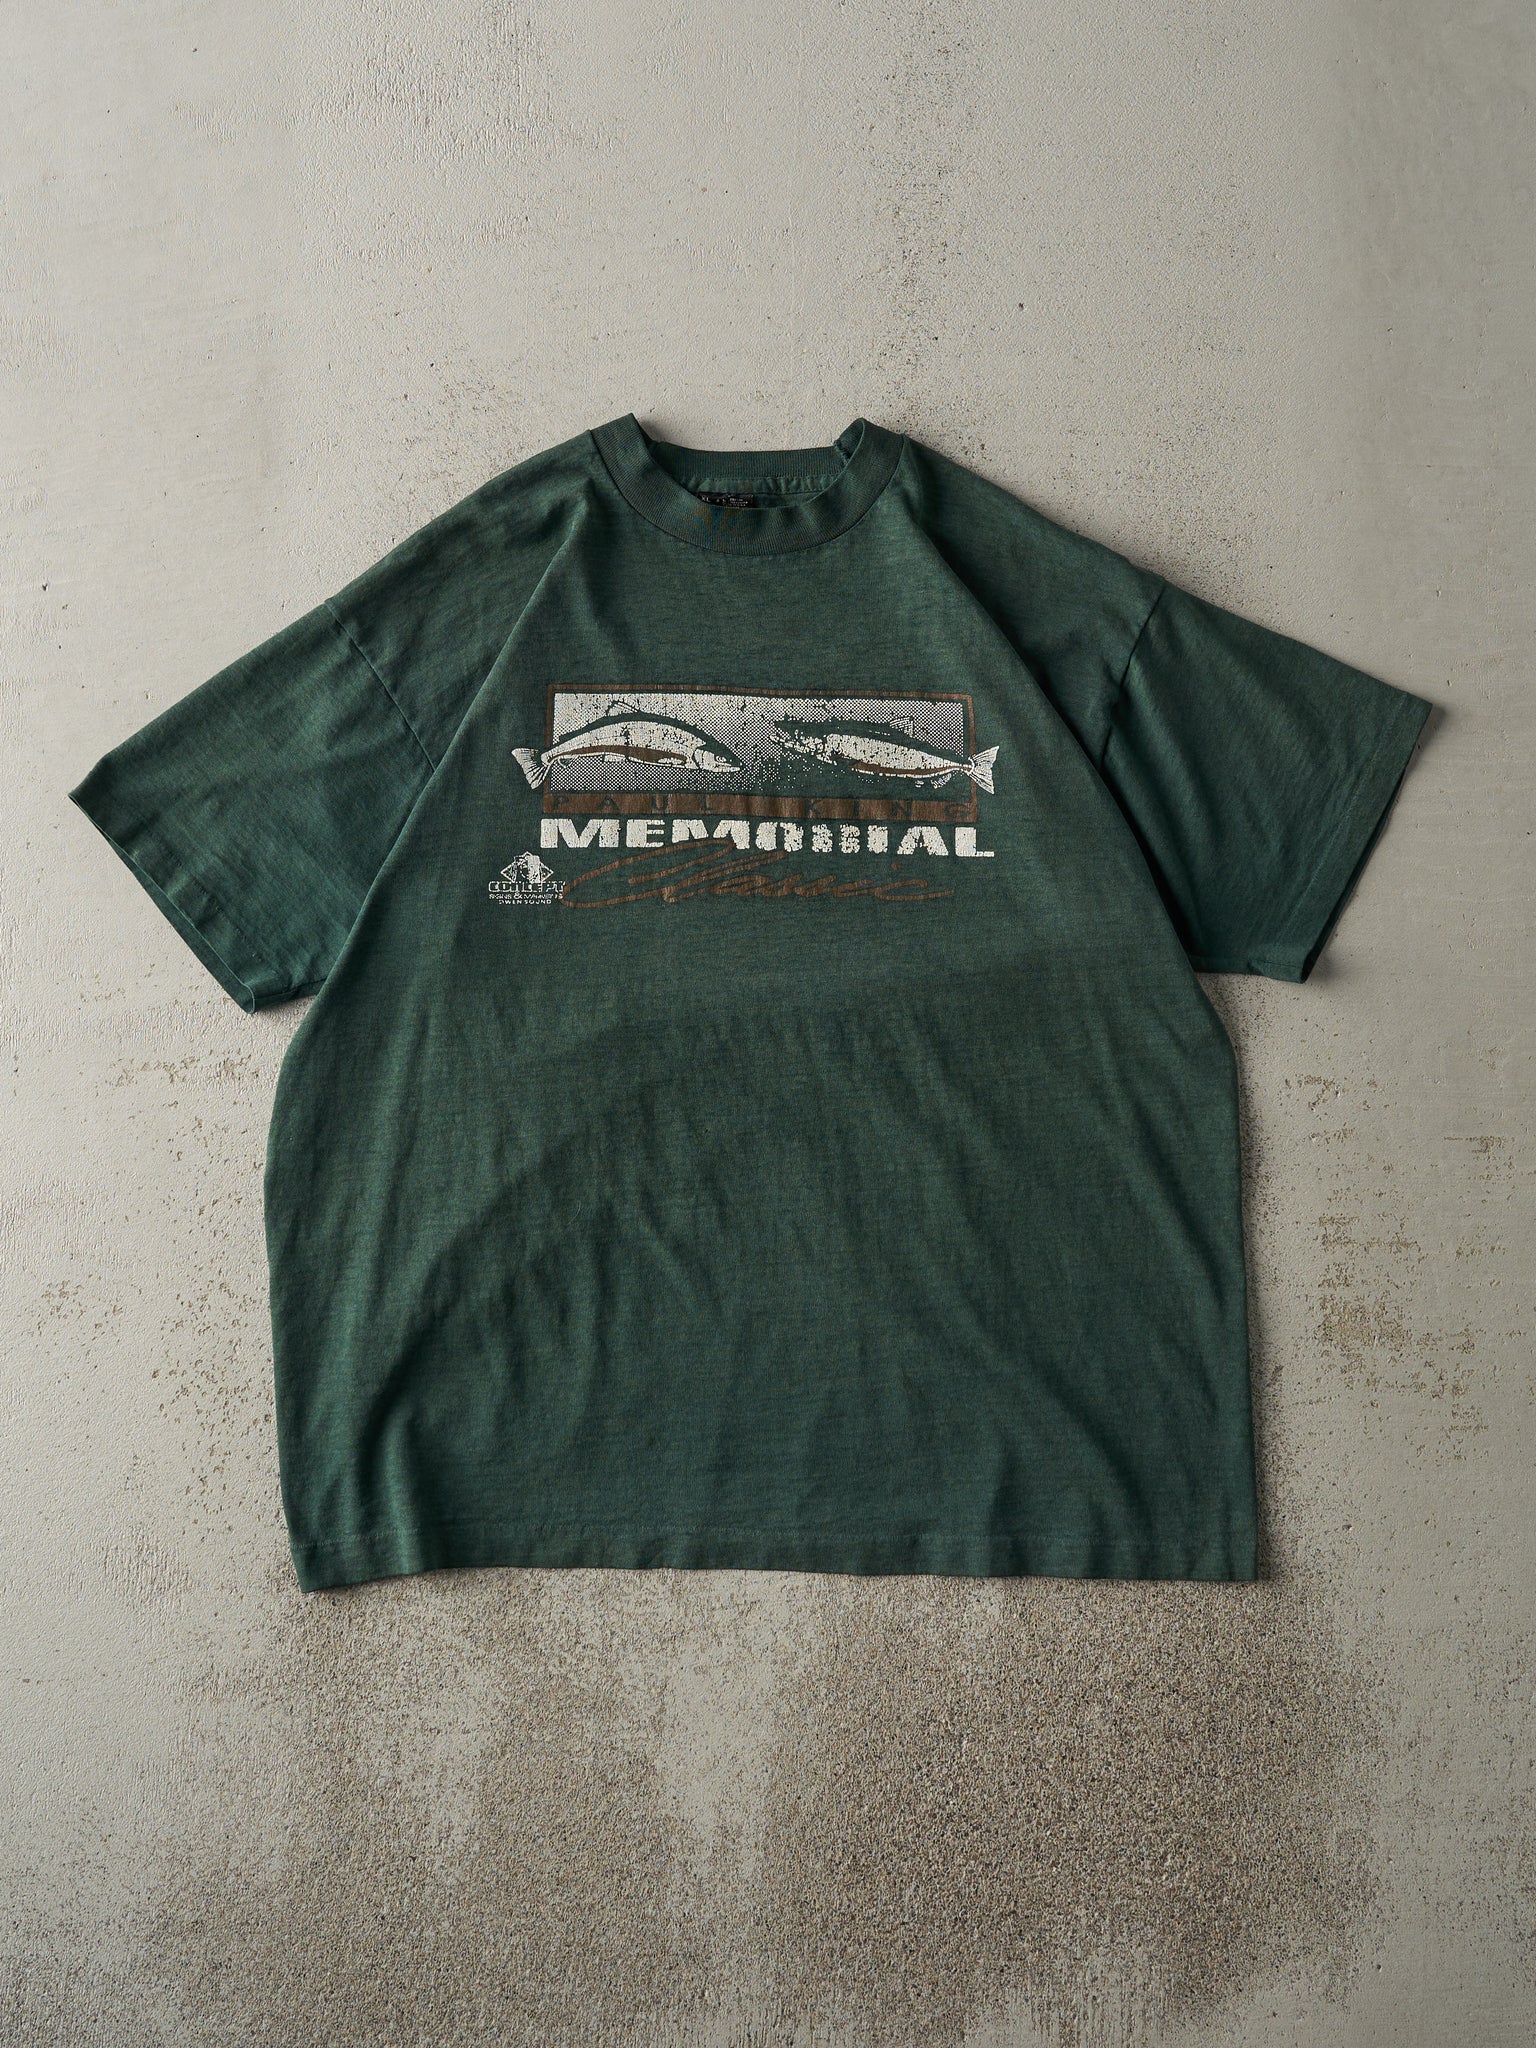 Vintage 90s Forest Green Paul King Memorial Classic Single Stitch Tee (M/L)